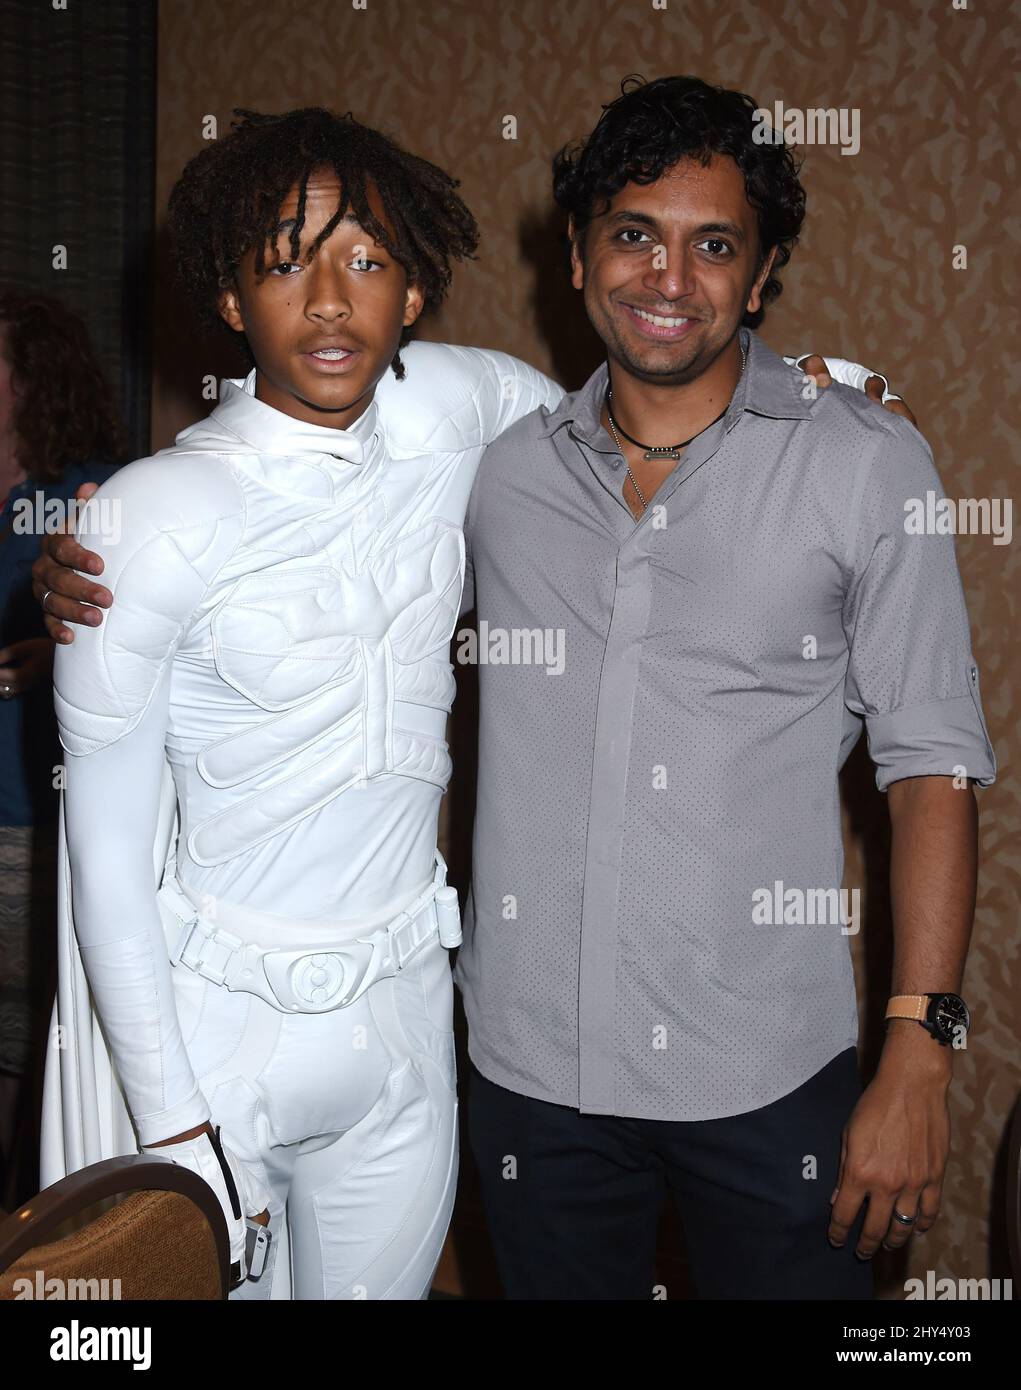 https://c8.alamy.com/comp/2HY4Y03/jaden-smith-and-m-night-shyamalan-attending-day-one-of-comic-con-in-san-diego-california-2HY4Y03.jpg